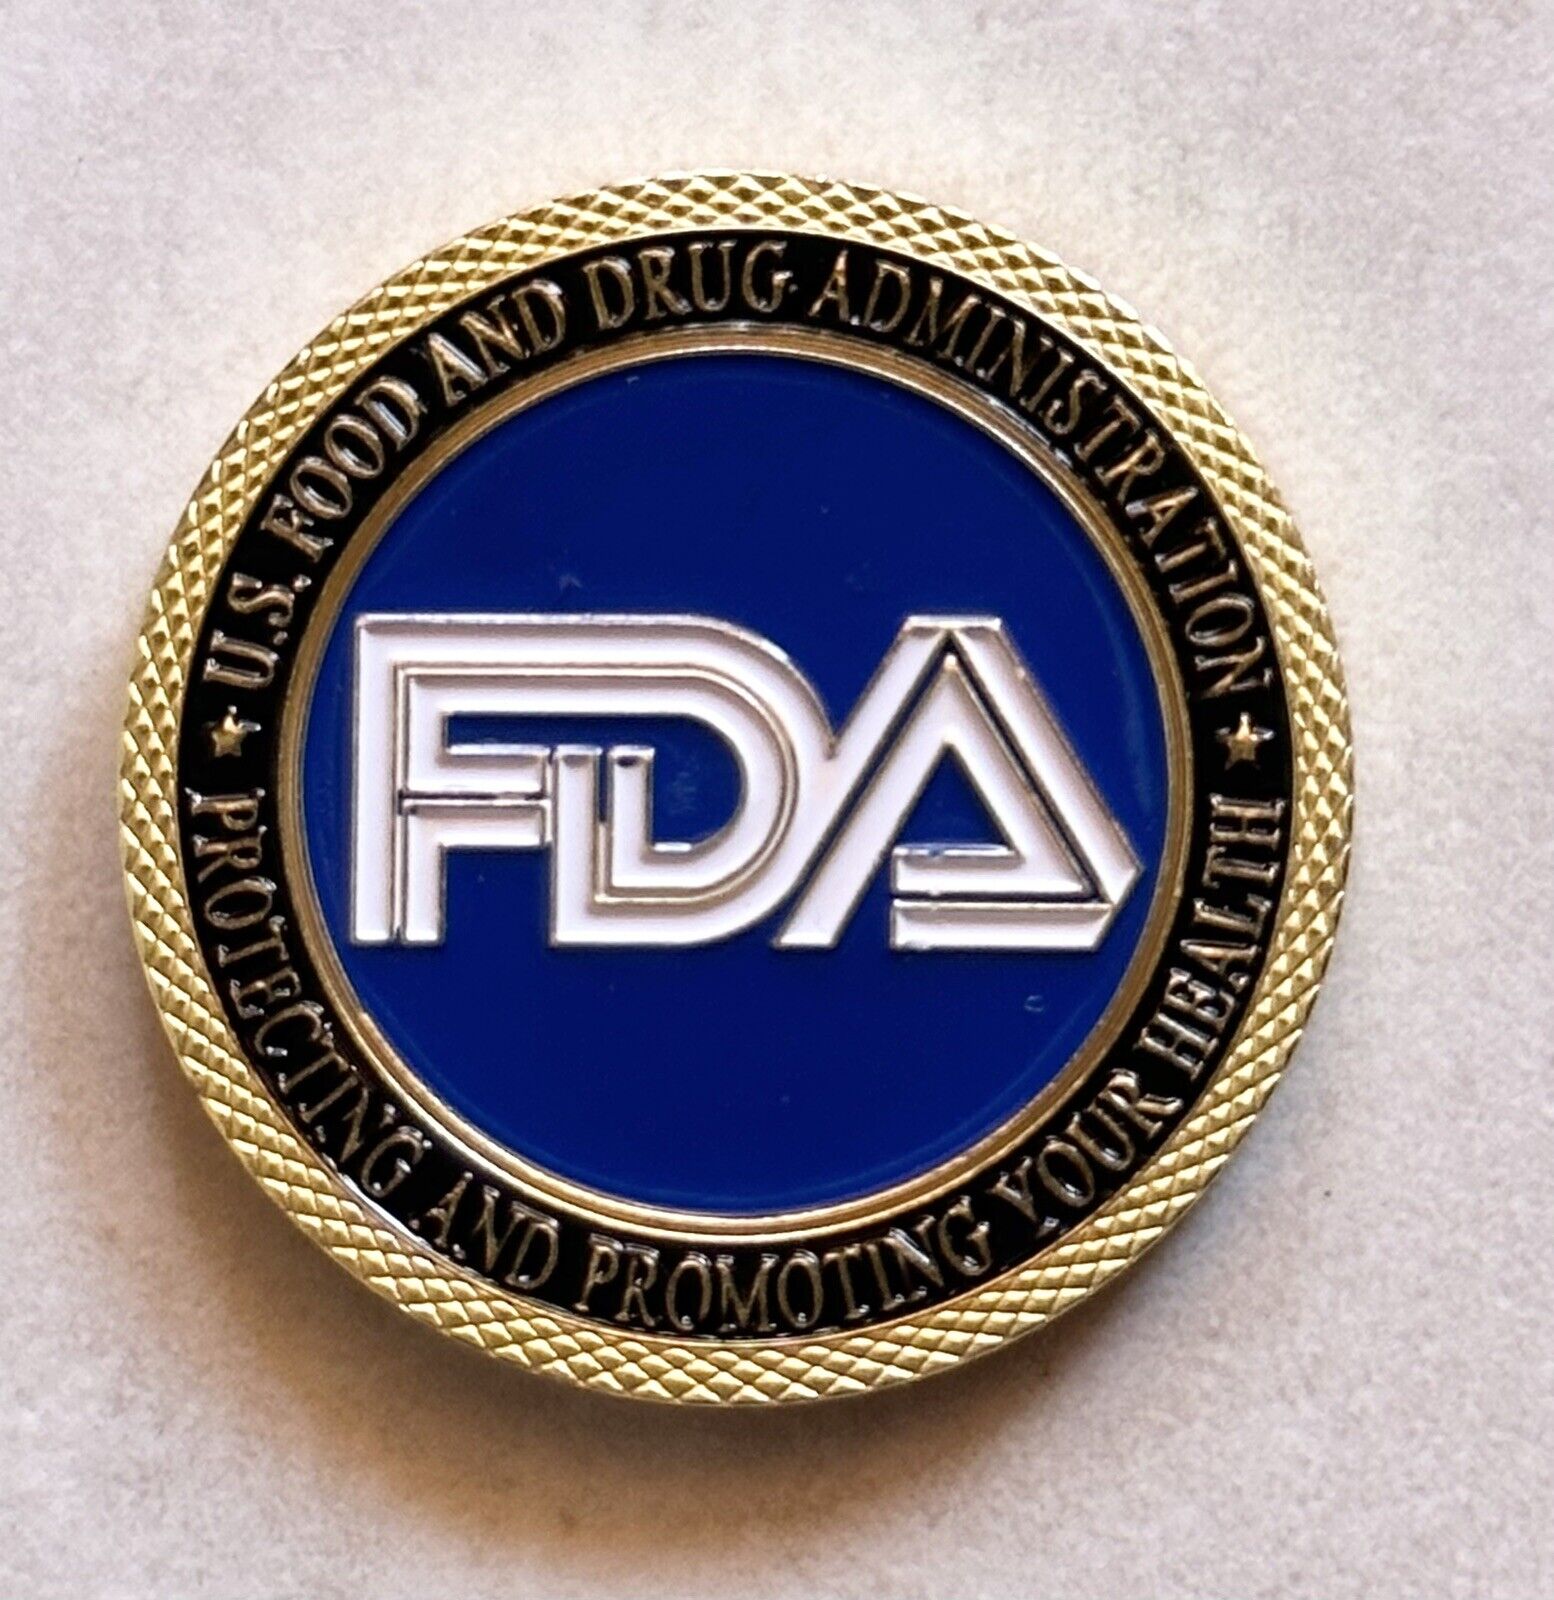 FOOD AND DRUG ADMINISTRATION (FDA) Challenge Coin 